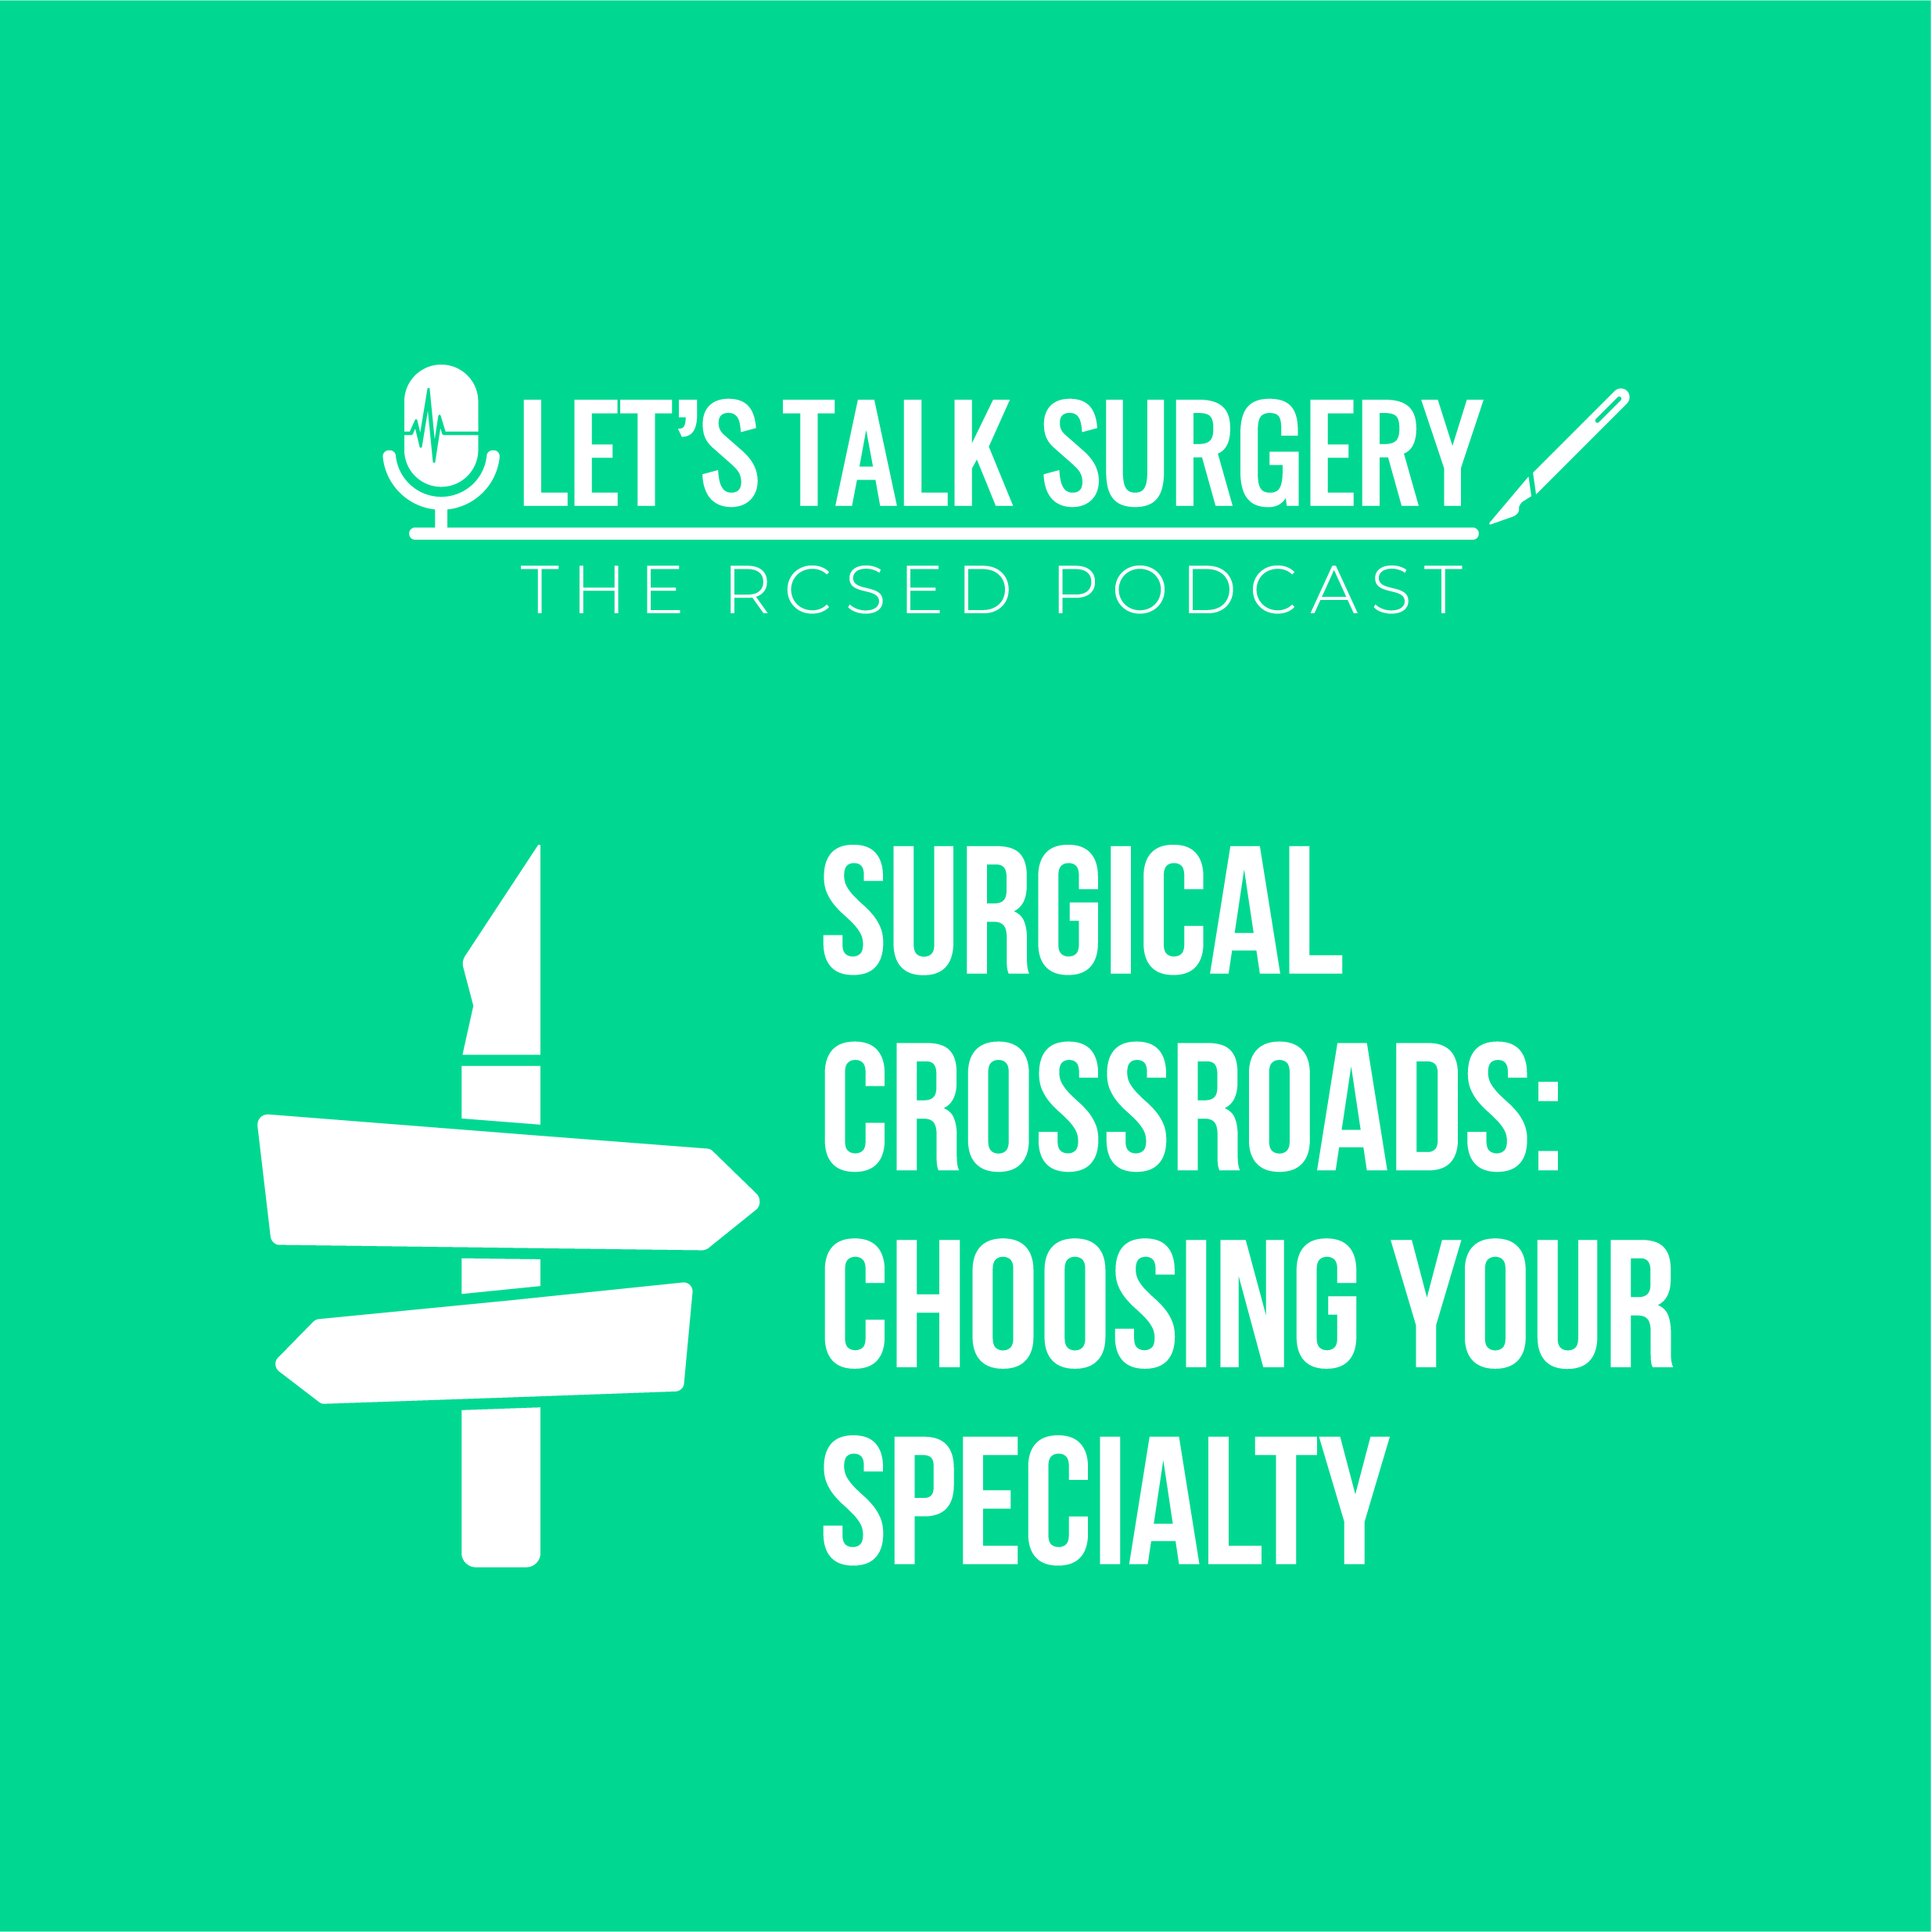 Introducing Surgical Crossroads: Choosing Your Specialty - the careers series from the Let's Talk Surgery podcast